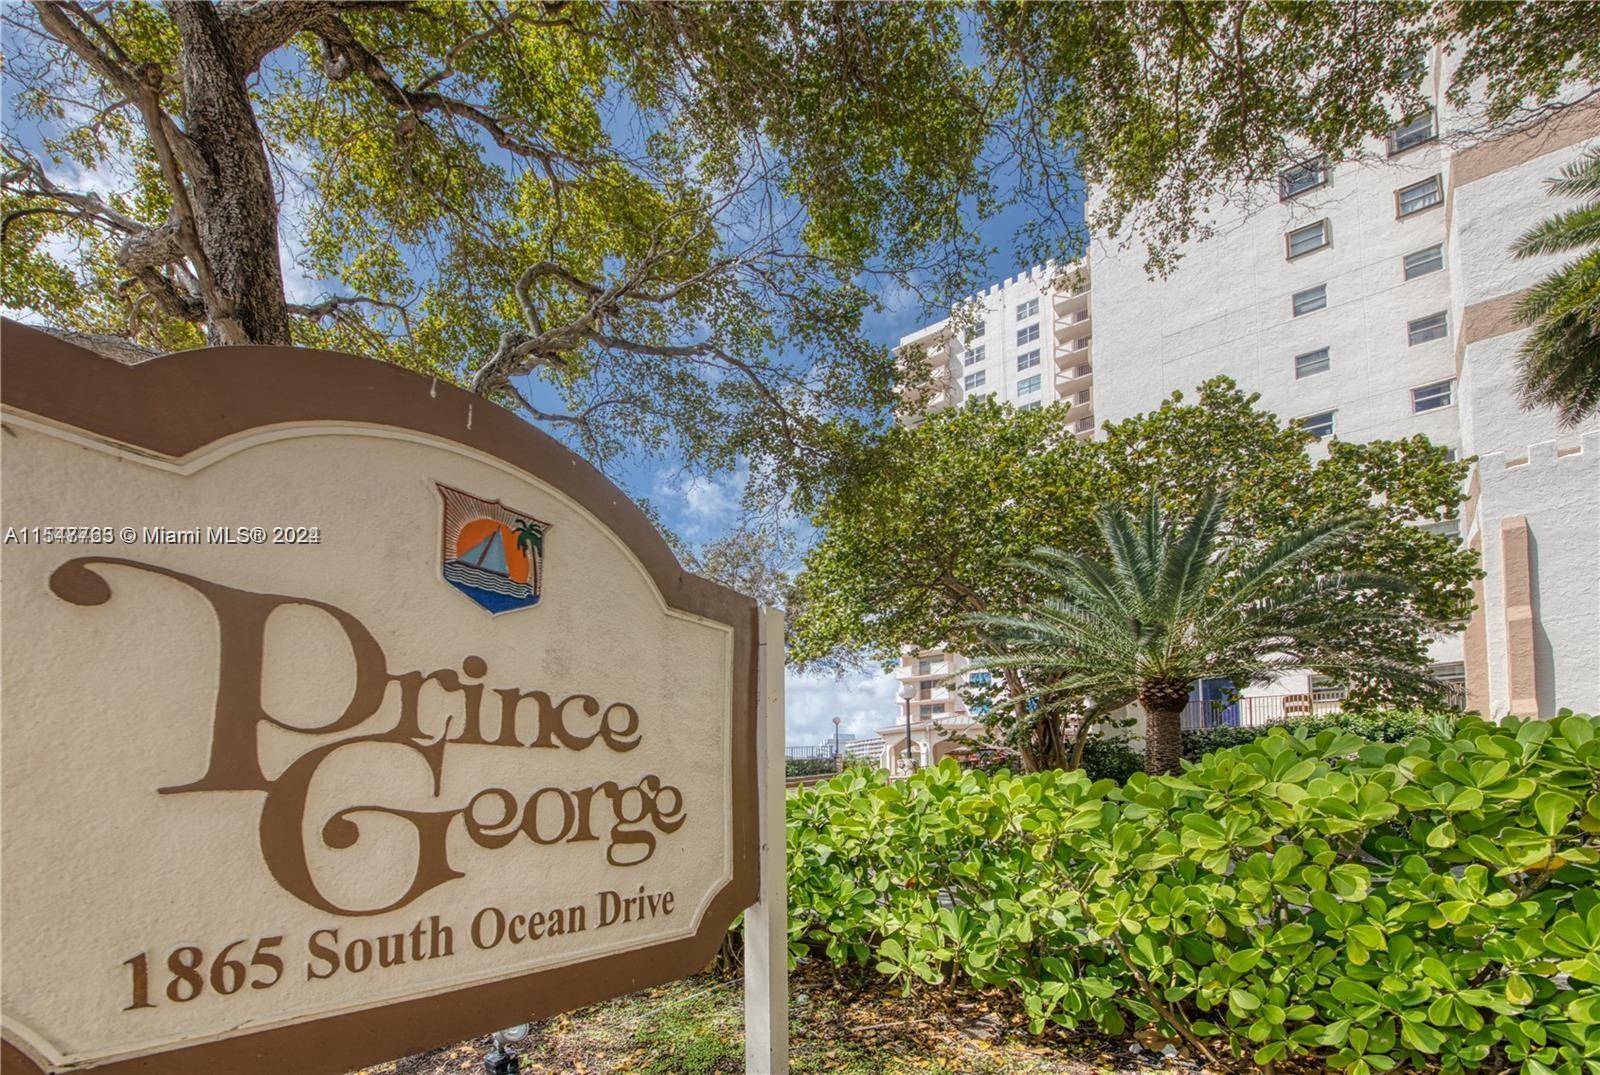 Nicely updated and modern 1, 300 SqFt condo, with beautiful views overlooking the Intracoastal, tennis and shuffleboard courts.